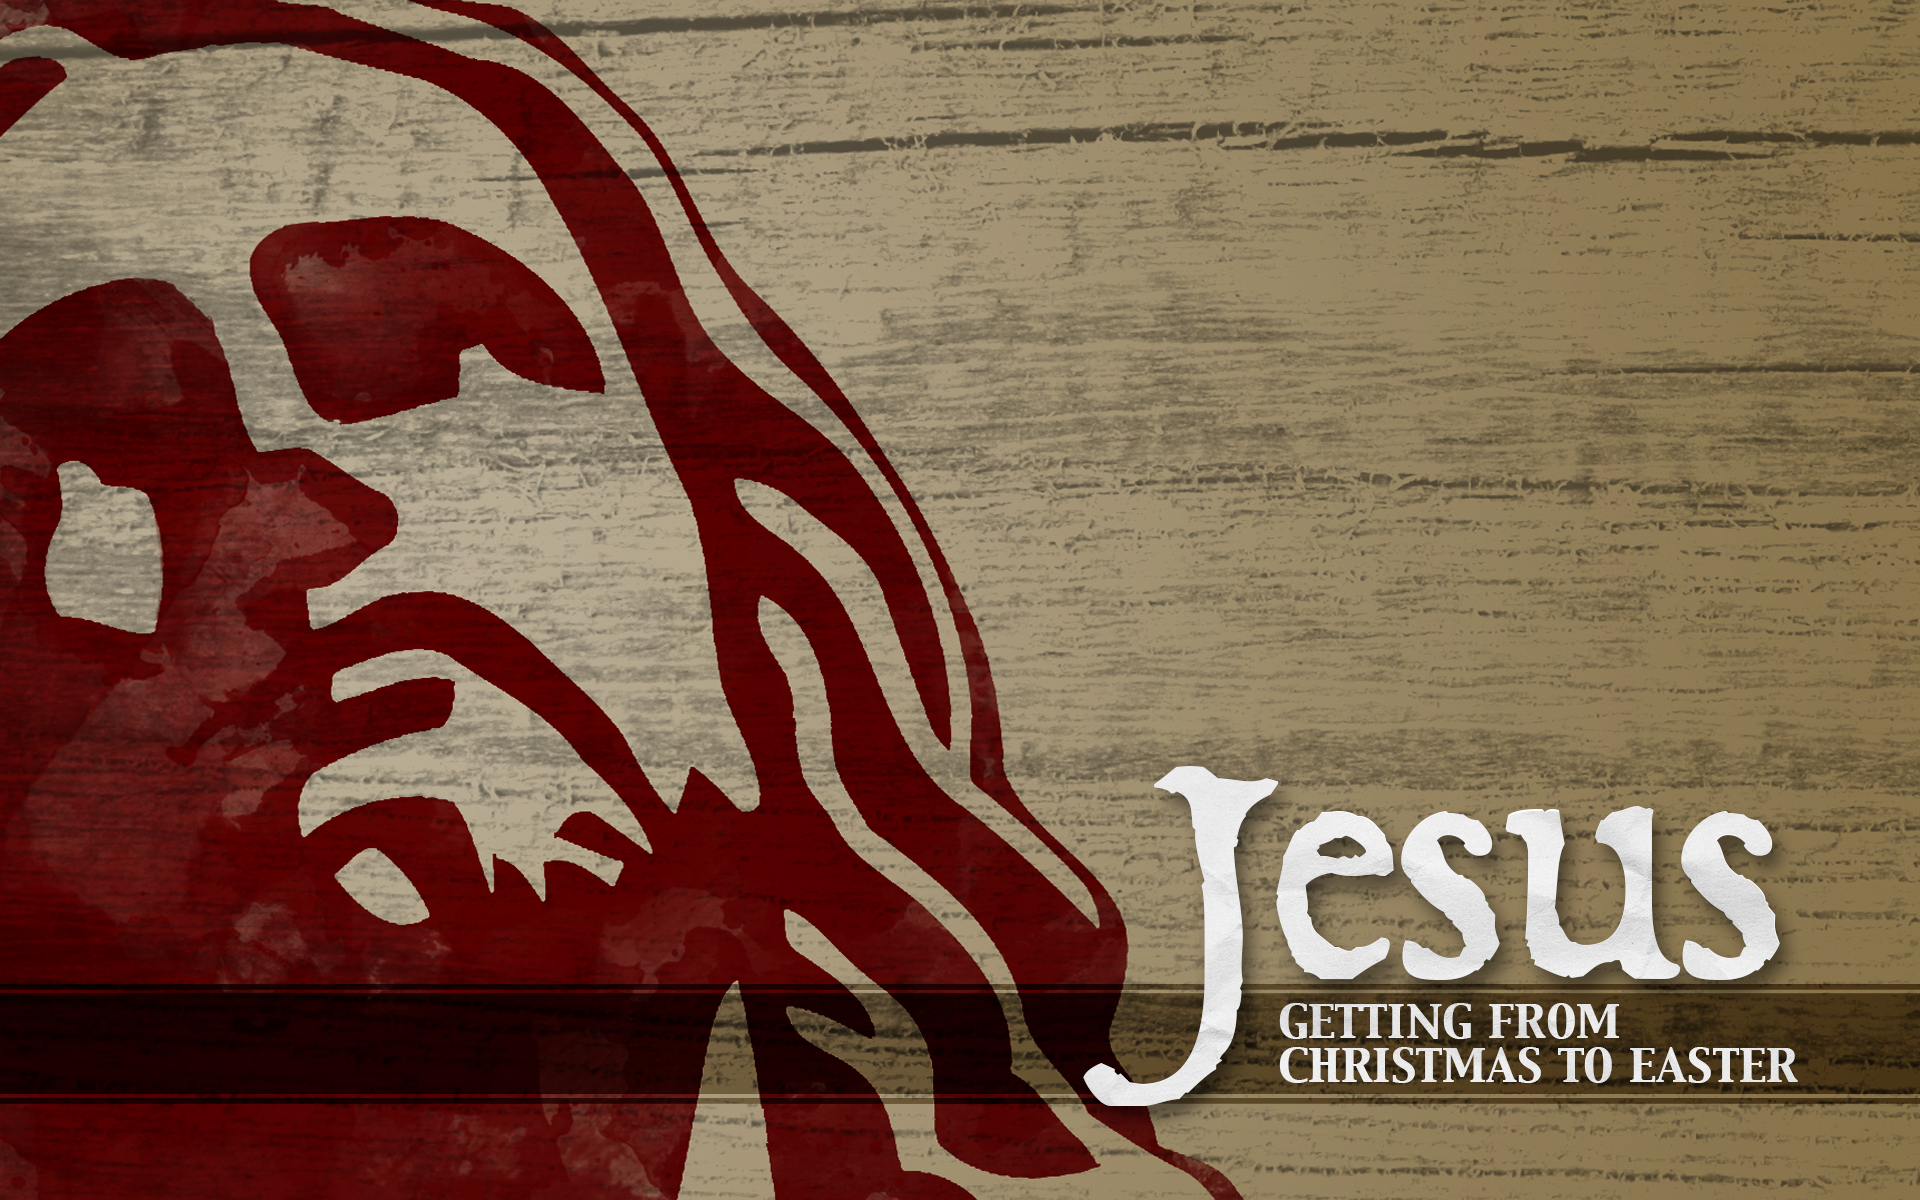 Jesus Wallpapers Images HD fonts